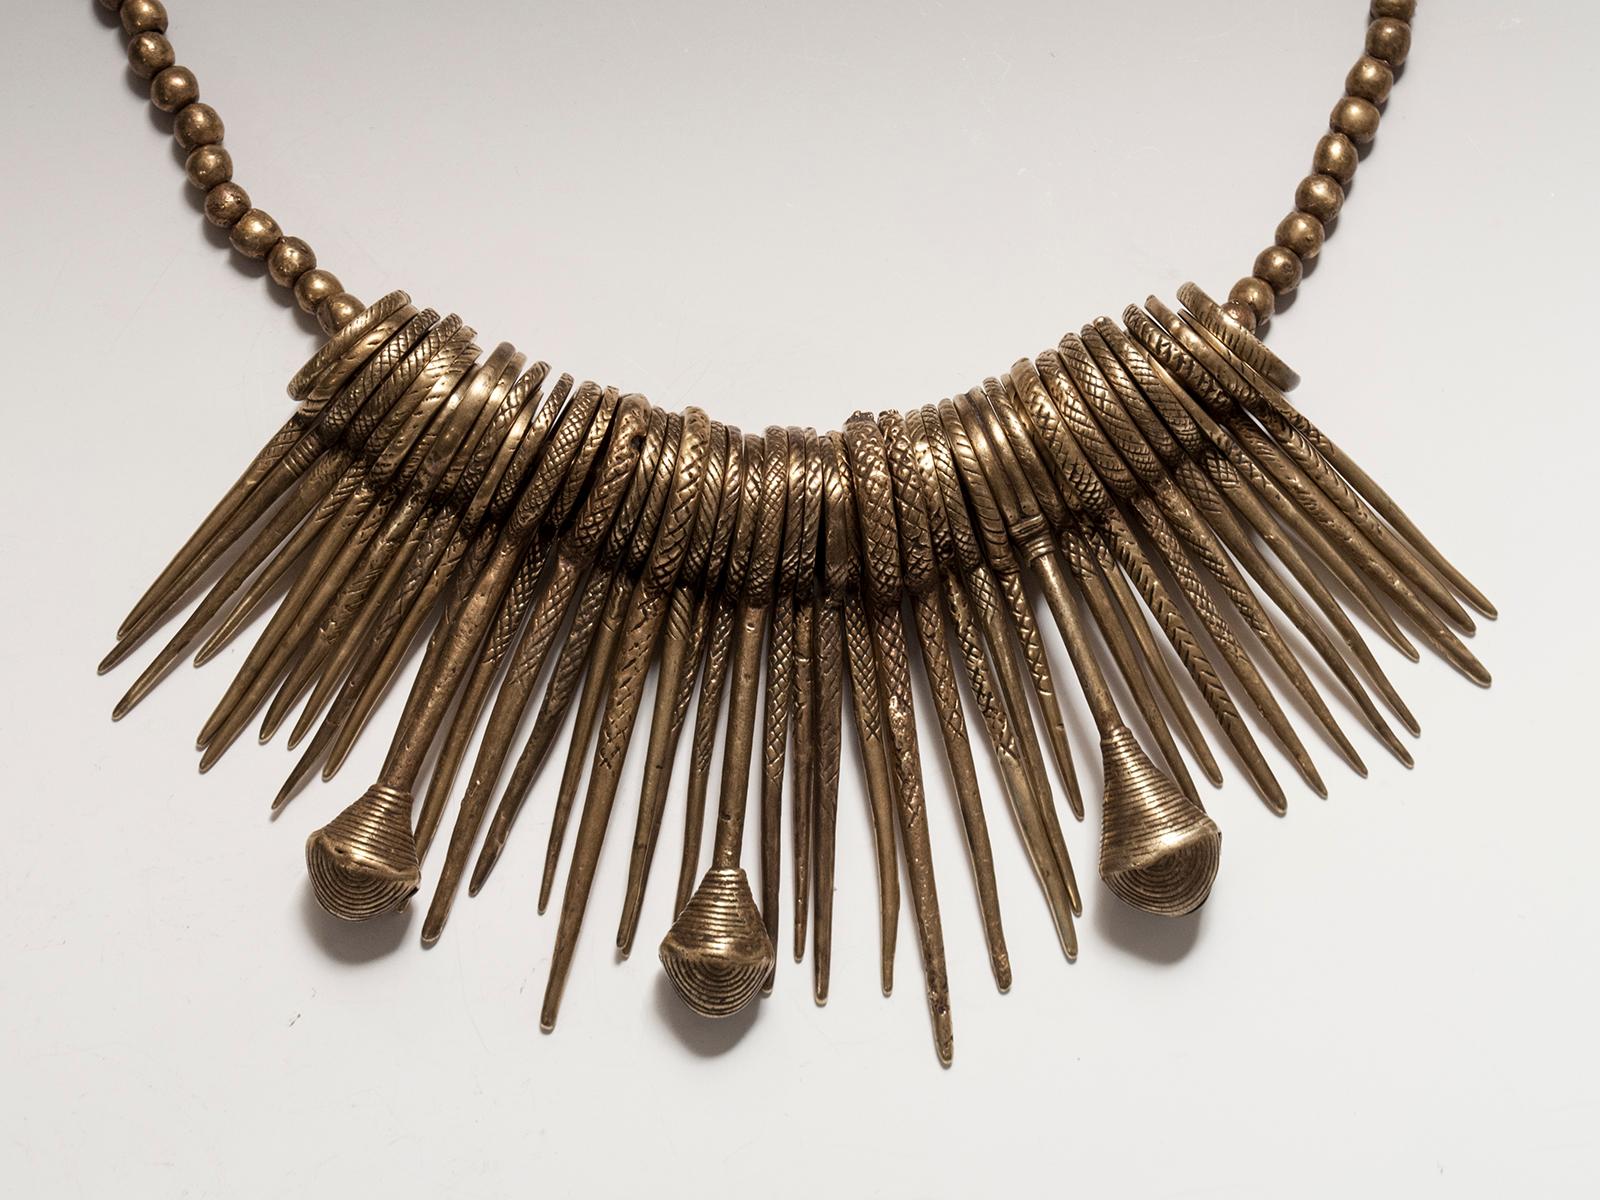 Early 20th century tribal bronzed cache-sexe modesty apron, Vere People, Cameroon

A heavy set of bronze spikes interspersed with three bells forms this cache-sexe from the Vere people of Cameroon/northern Nigeria. It contains similar elements as